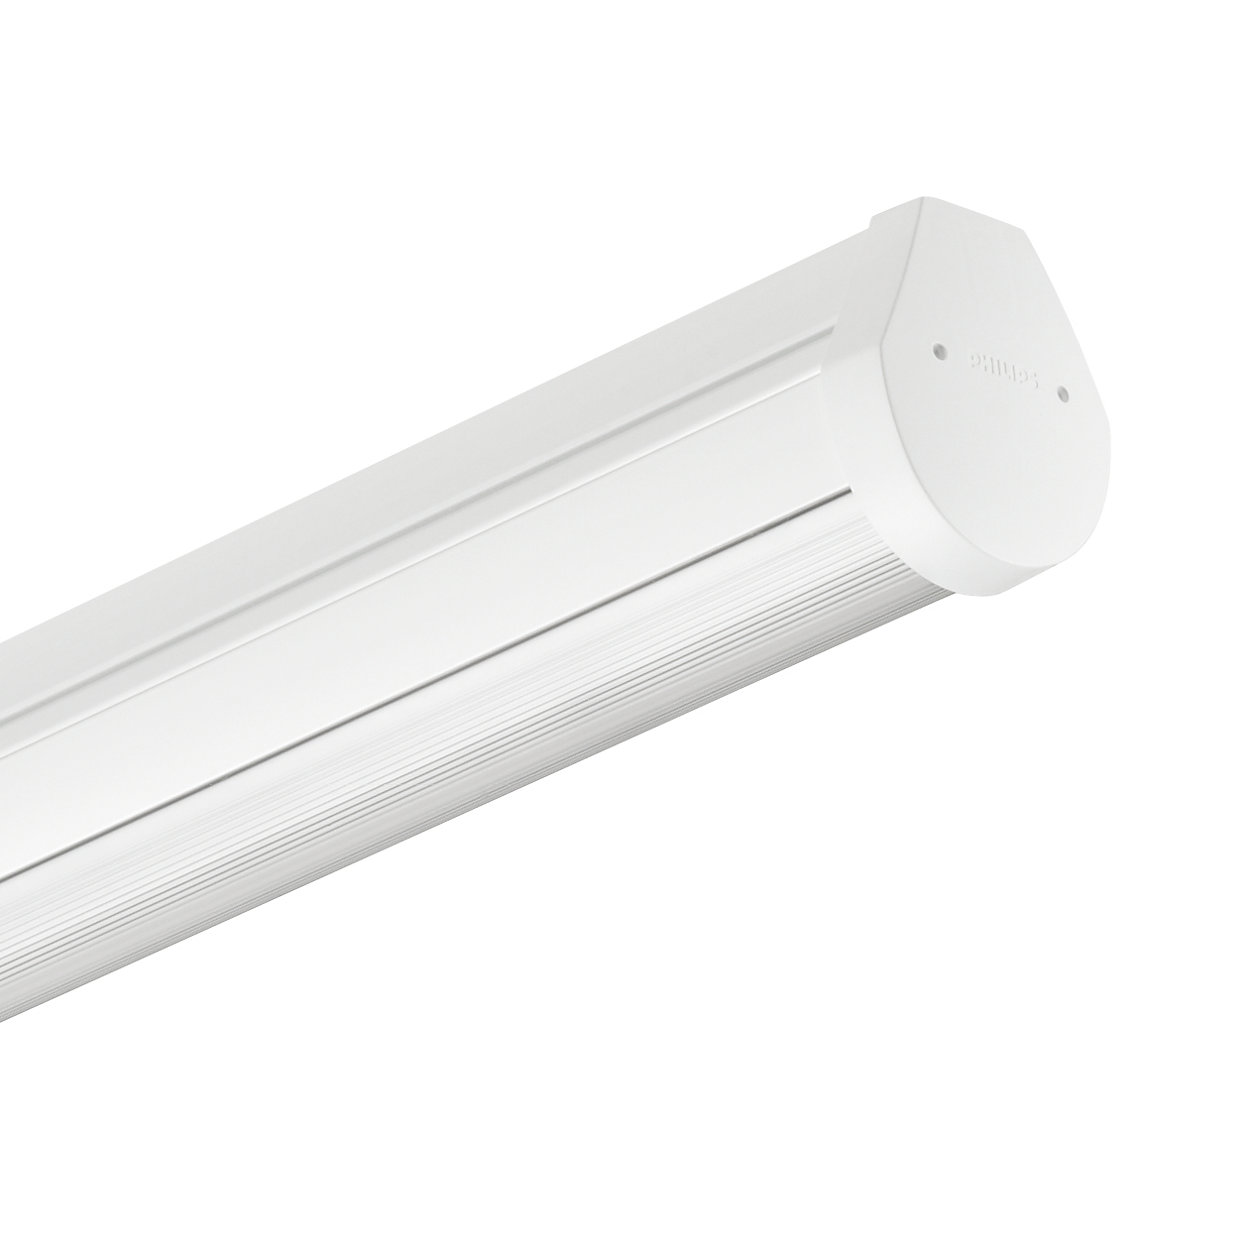 Maxos LED Performer – efficient and precise line lighting